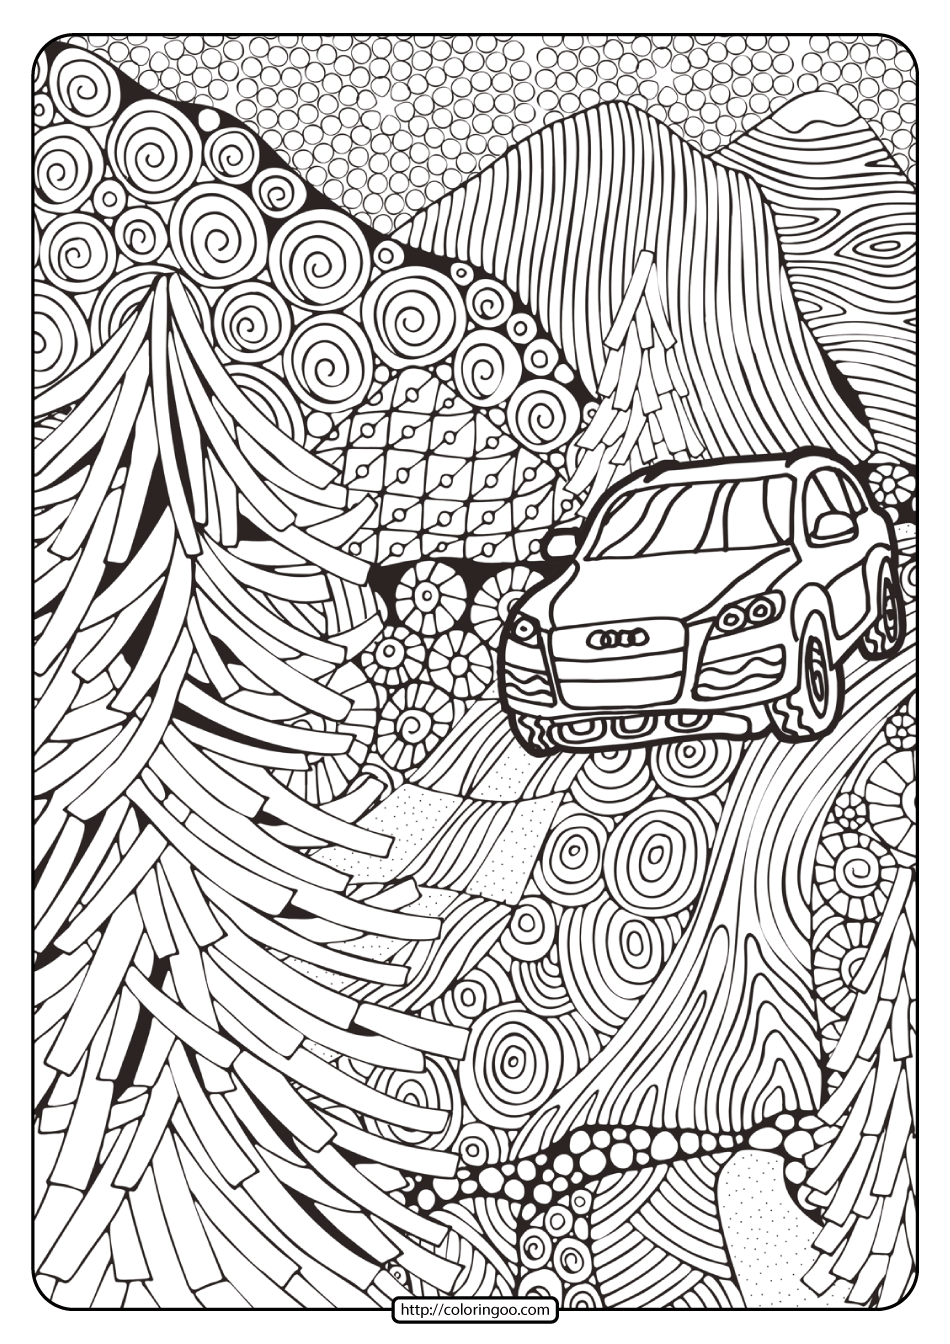 Printable Audi Cars Coloring Book & Page – 02